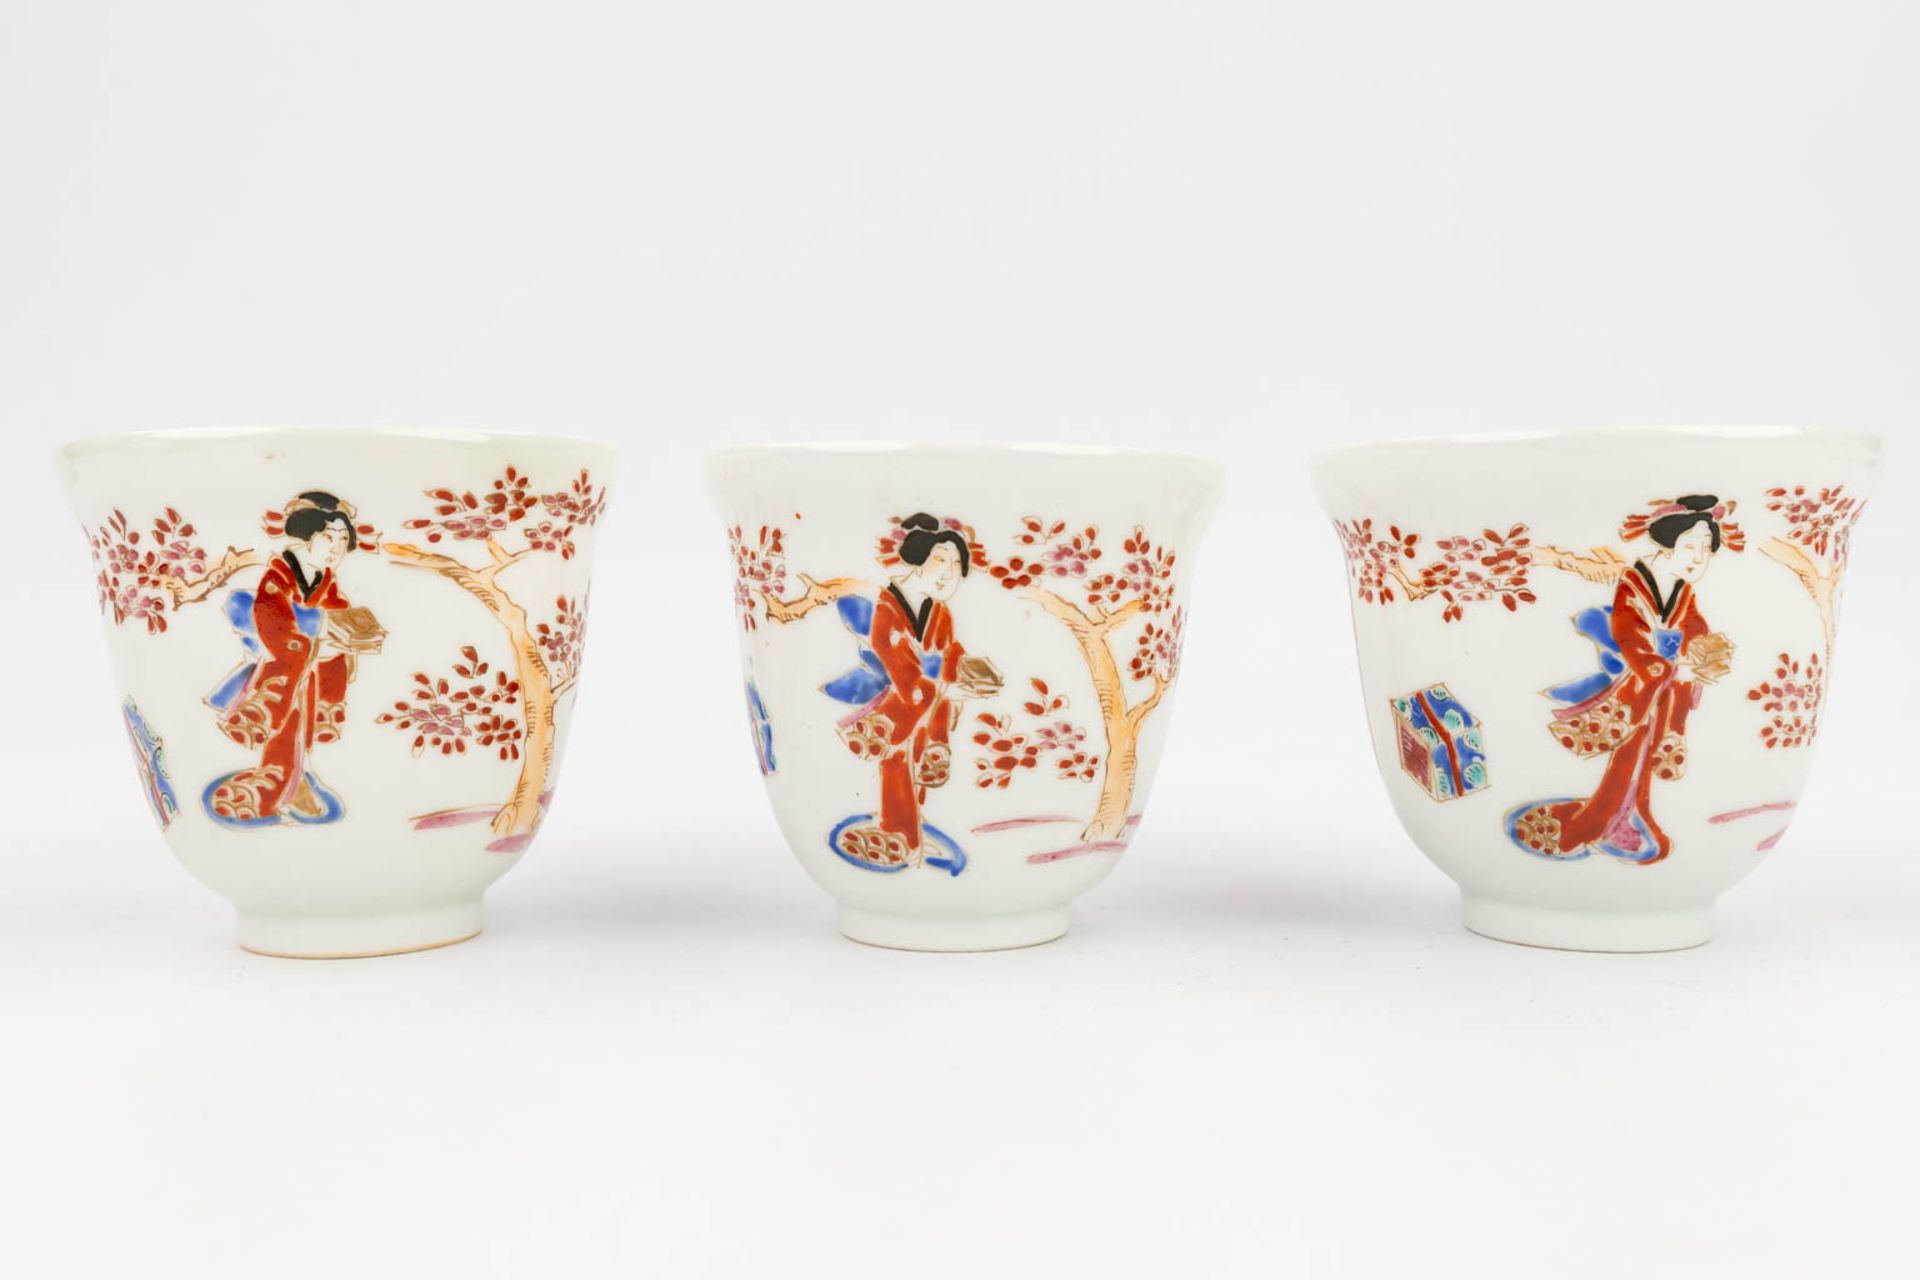 A large collection of bowls and saucers, eggshell porcelain, Japan, 20th C. (H:9 x D:9 cm) - Image 20 of 24